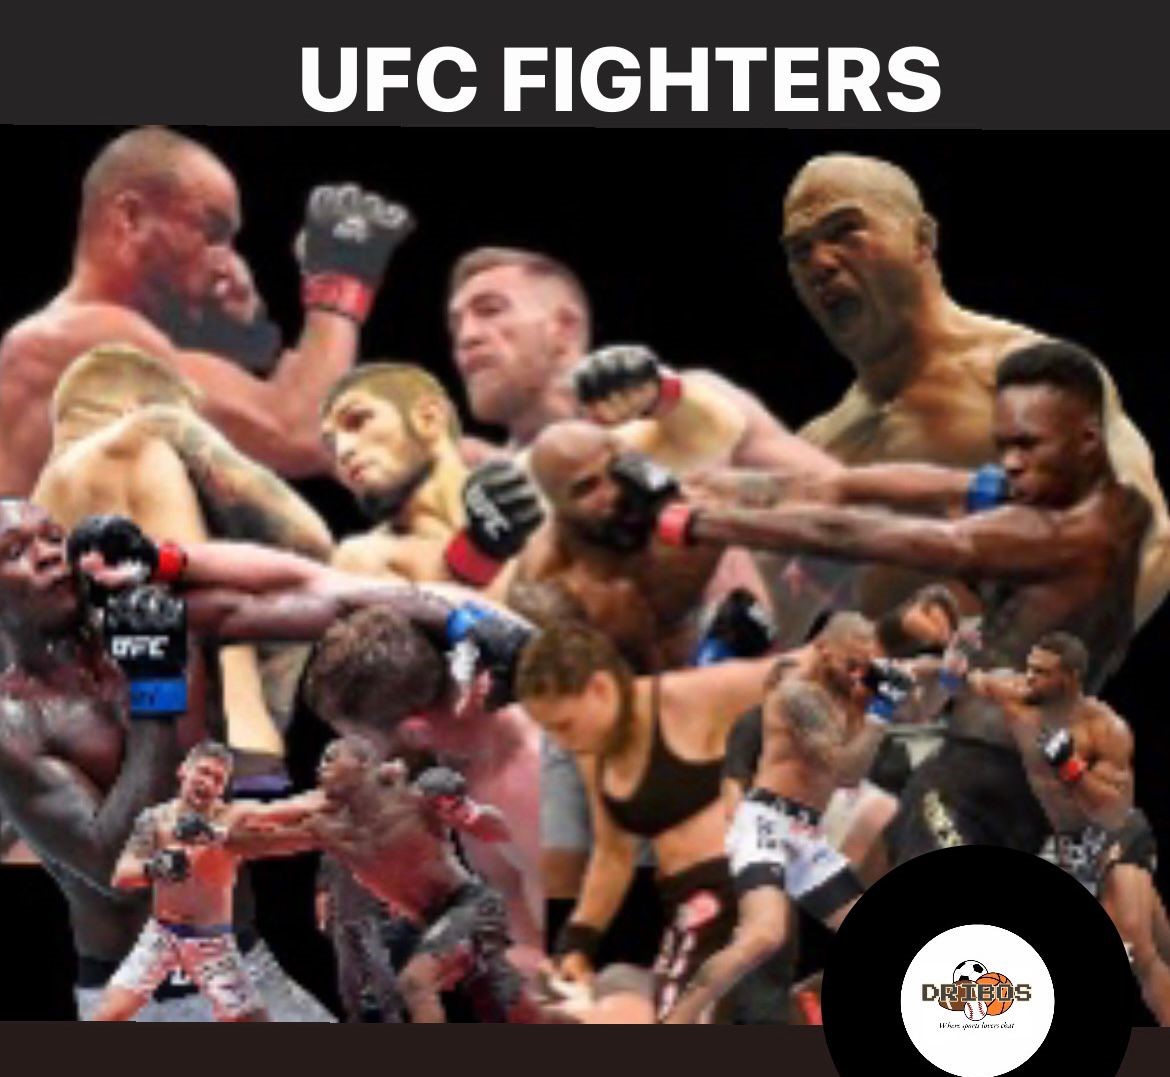 WHO IS YOUR BEST MMA FIGHTER?